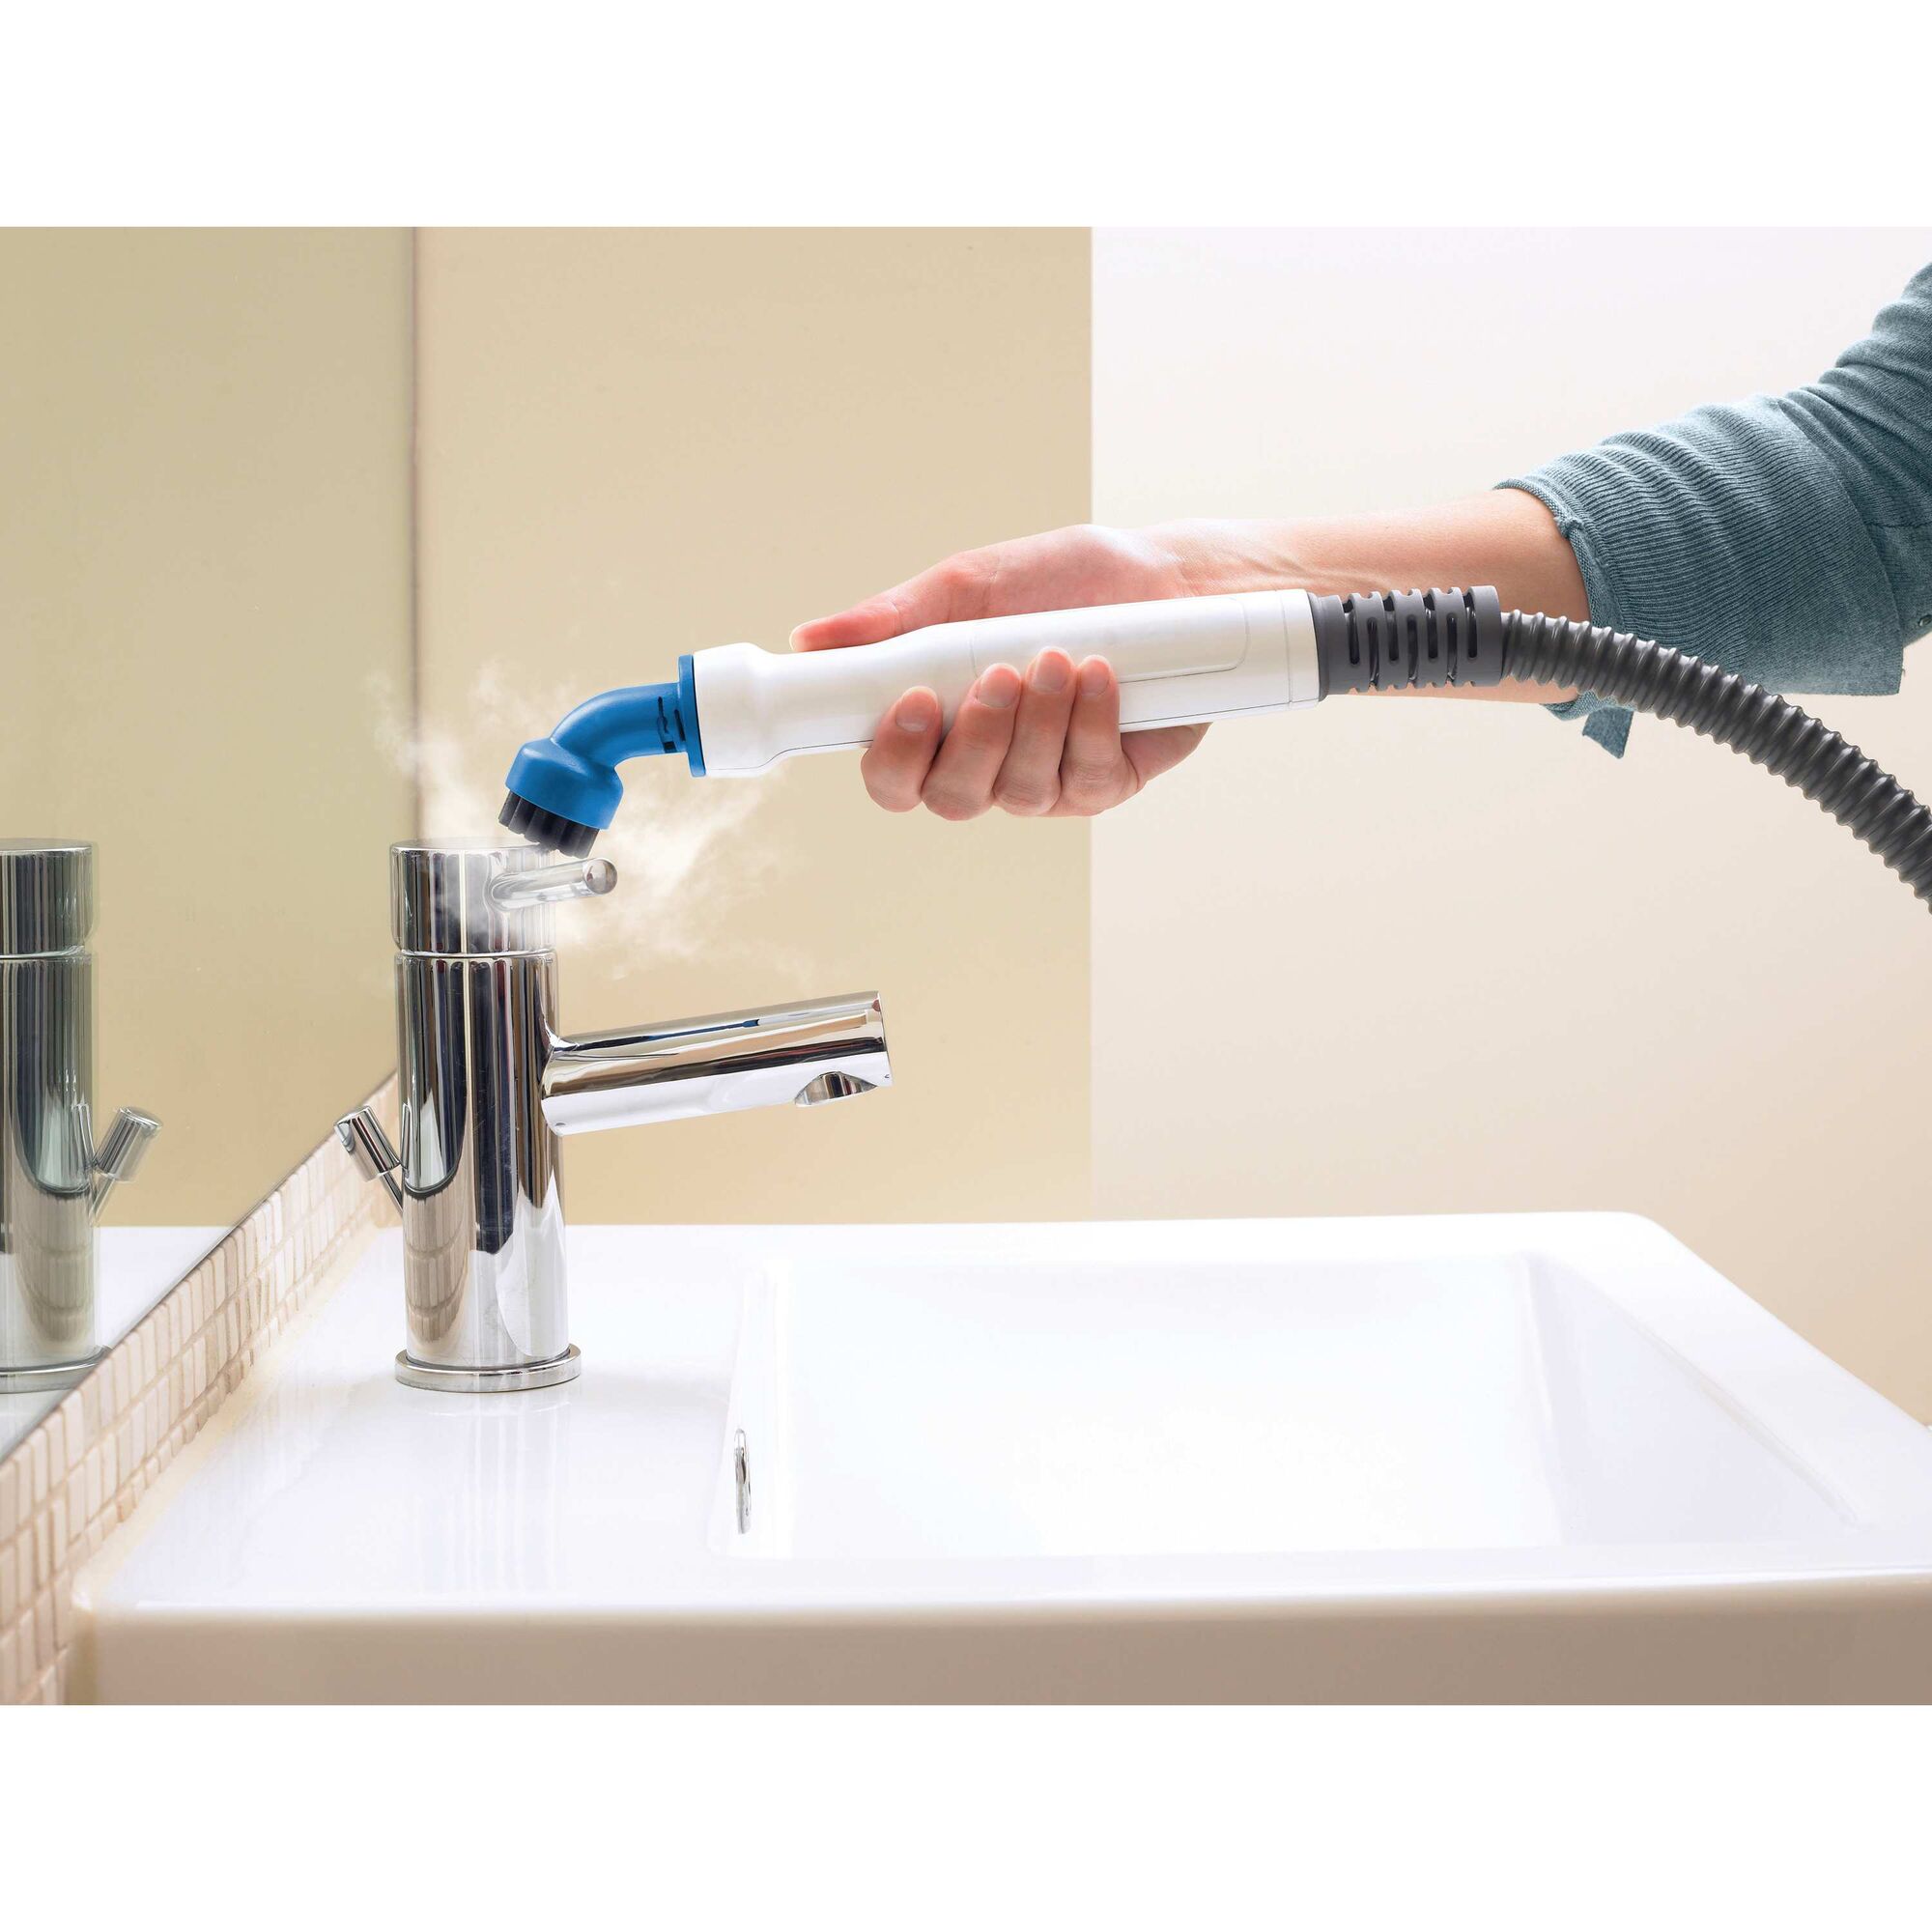 7 in 1 Steam Mop with SteamGlove handheld steamer being used by a person to clean tap handle.